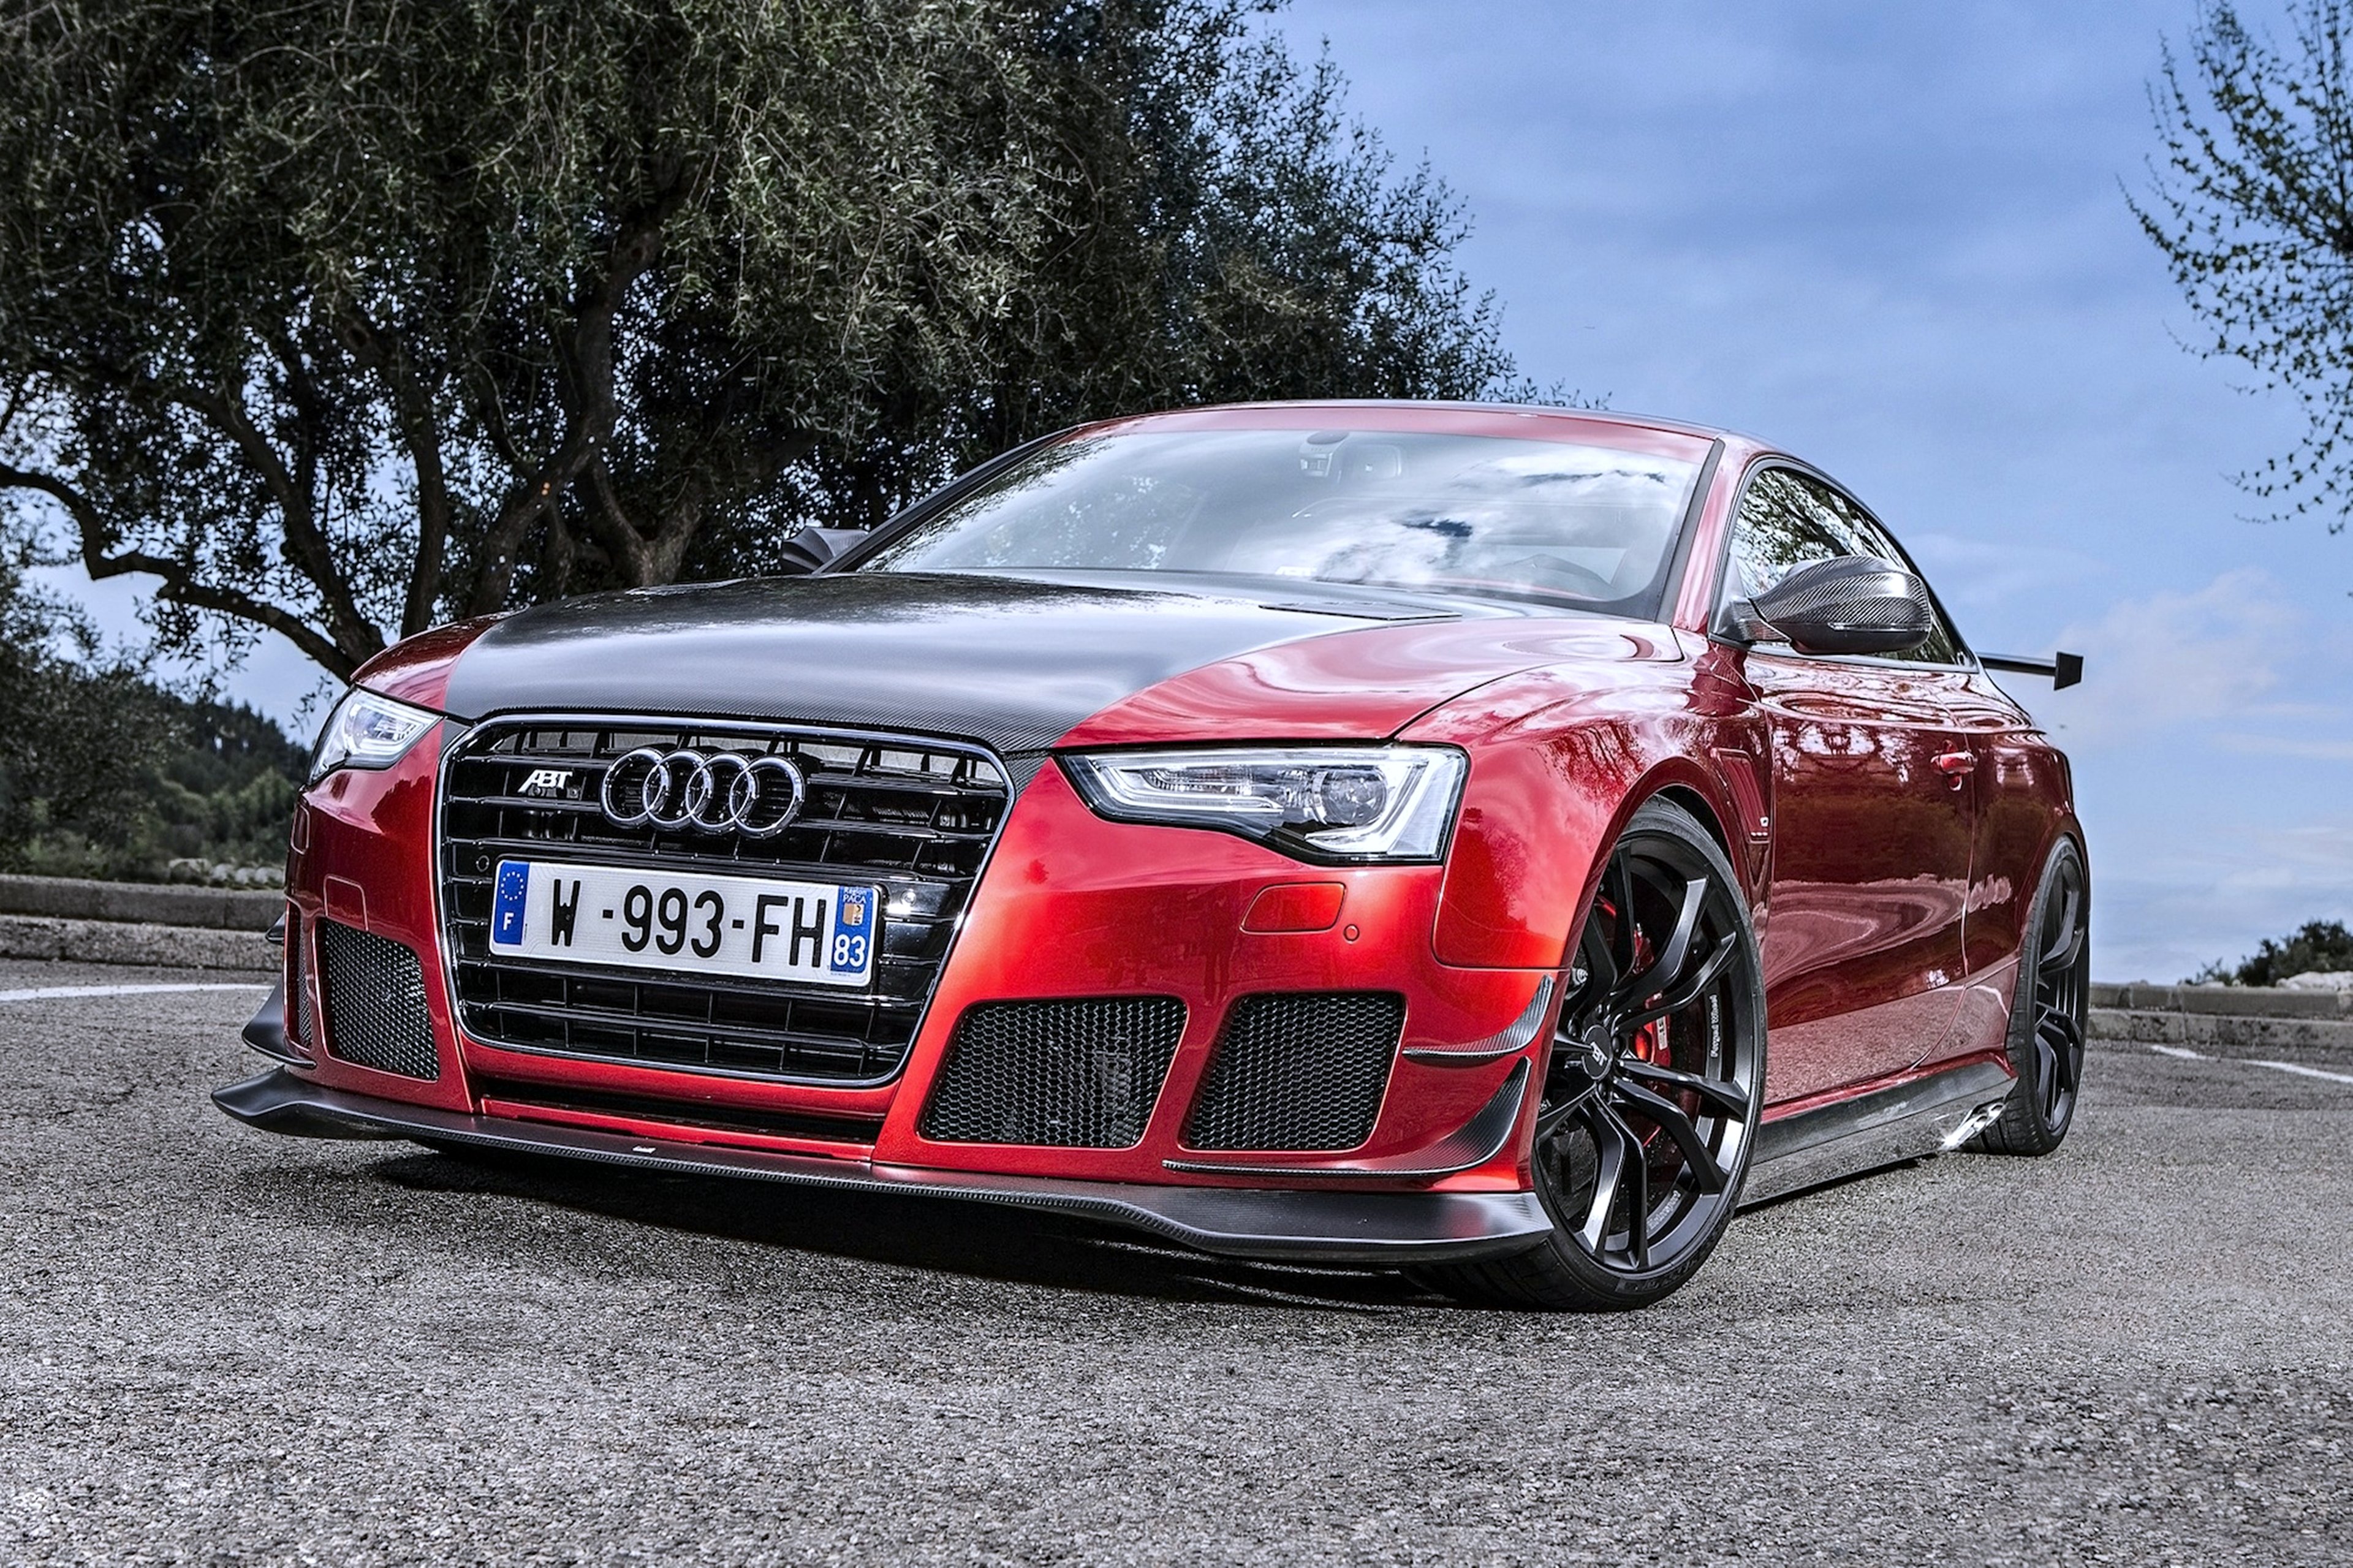 2013, Abt, Audi, Rs5 r, Tune, Germany, Red, Road, Speed, Motors, Cars, Race Wallpaper